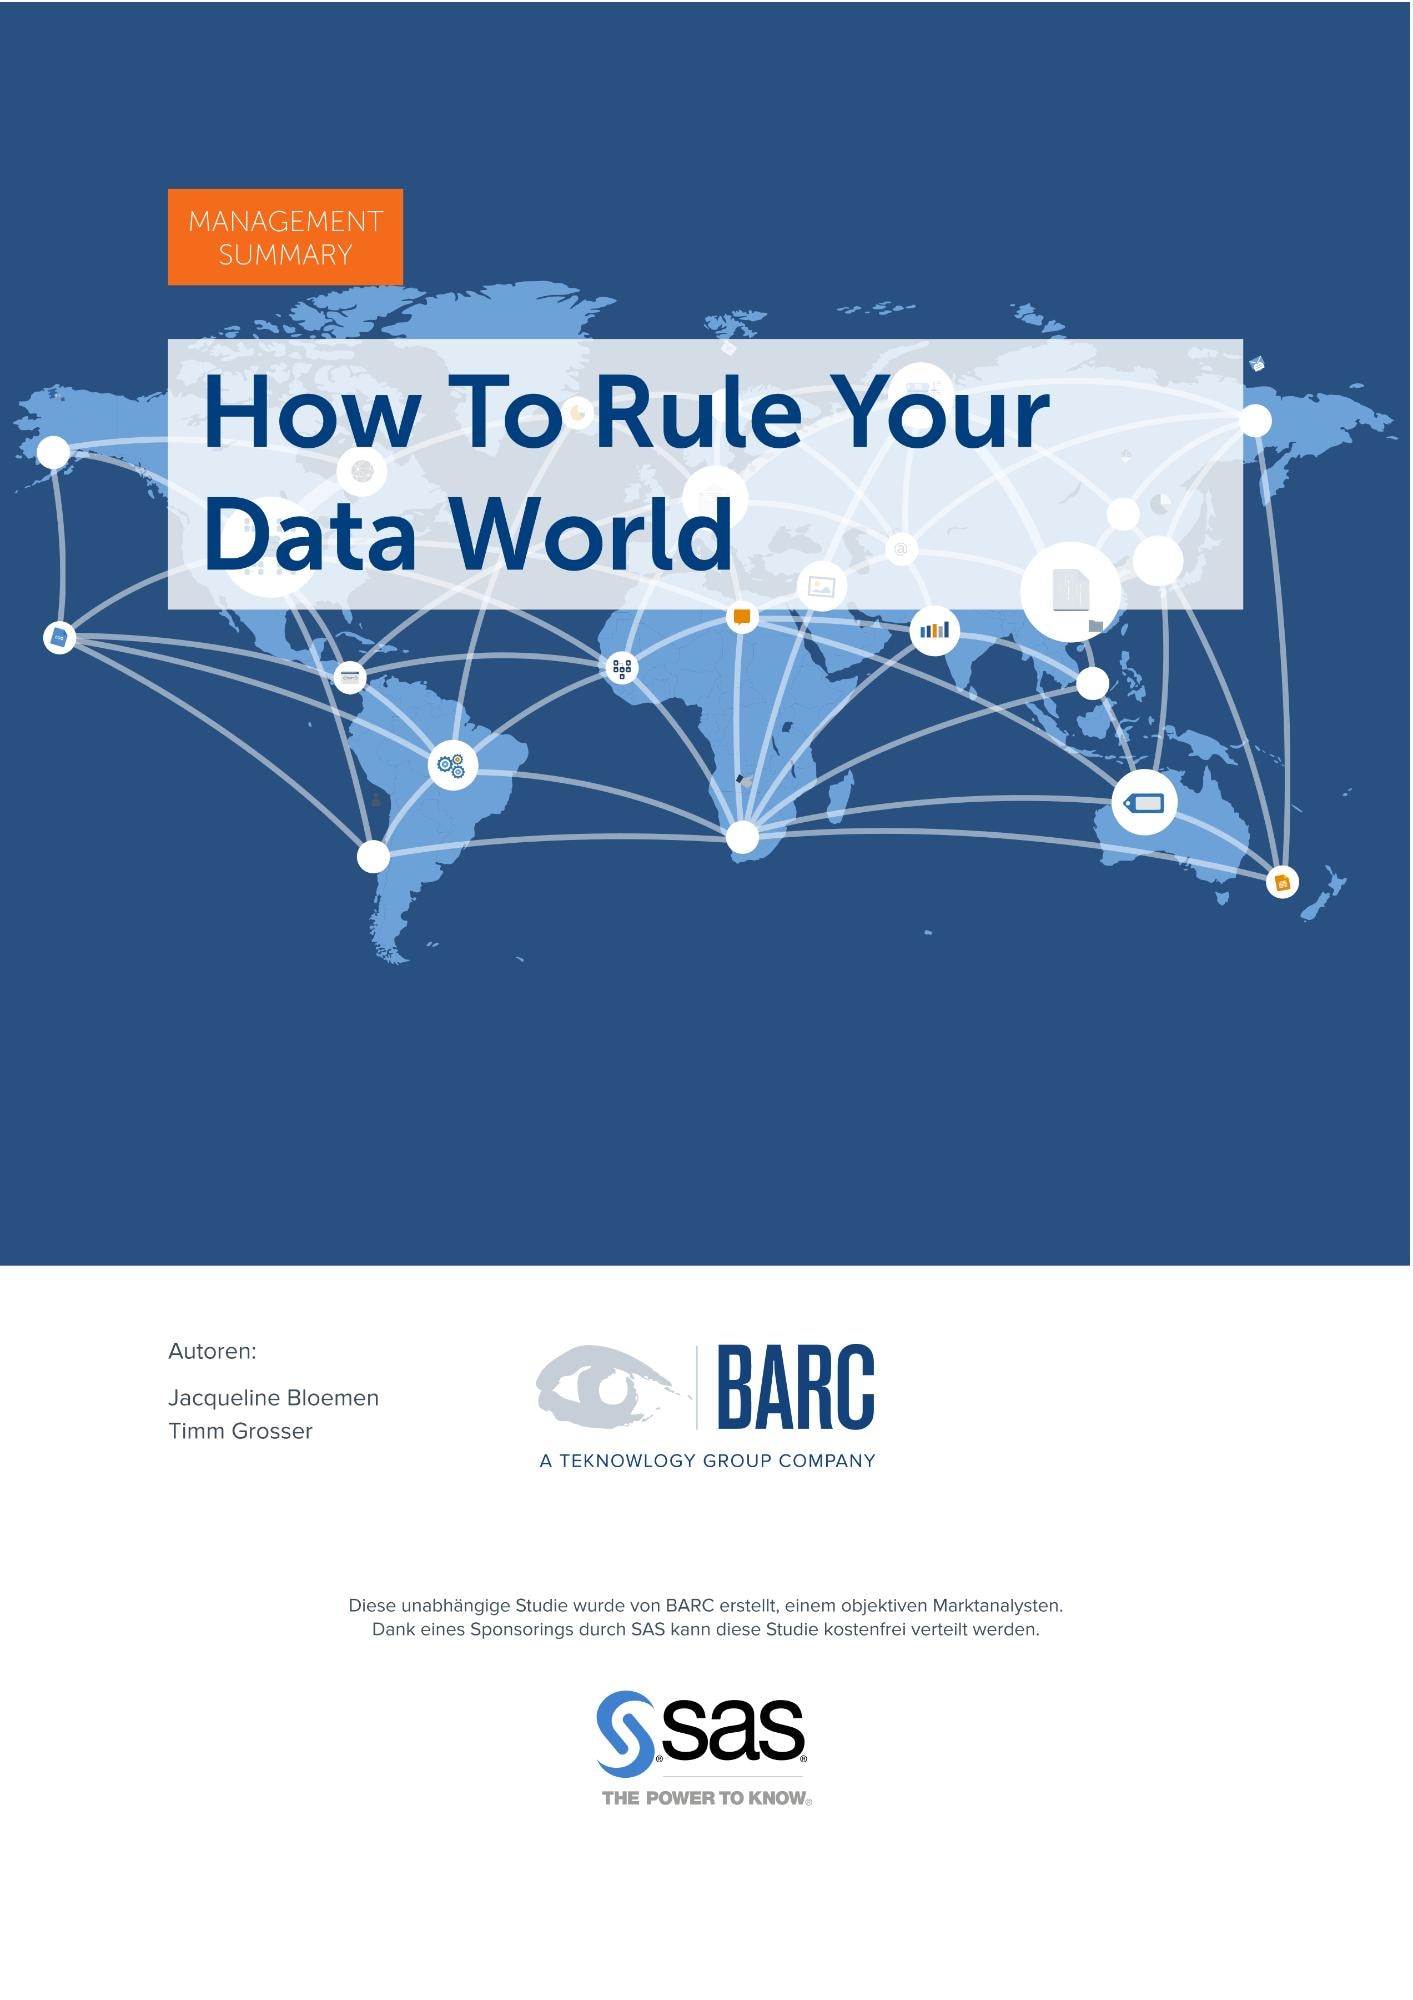 How To Rule Your Data World